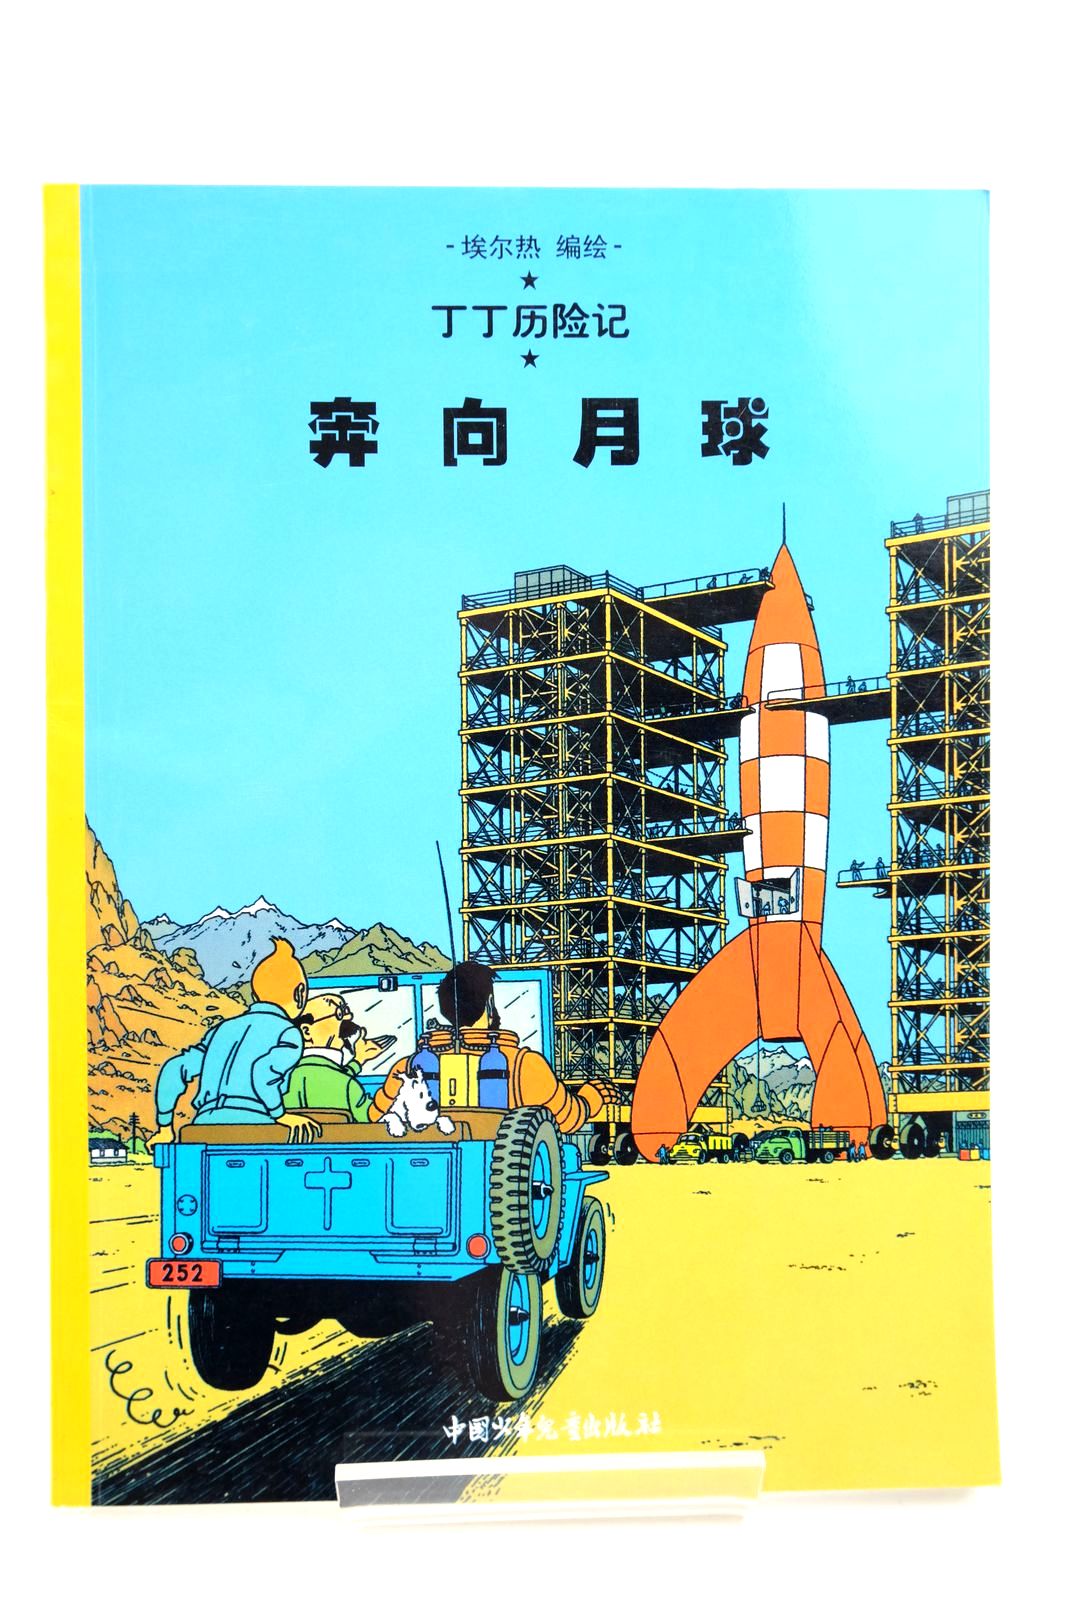 Photo of THE ADVENTURES OF TINTIN: DESTINATION MOON (CHINESE LANGUAGE EDITION) written by Herge, illustrated by Herge, published by China Press (STOCK CODE: 2140344)  for sale by Stella & Rose's Books